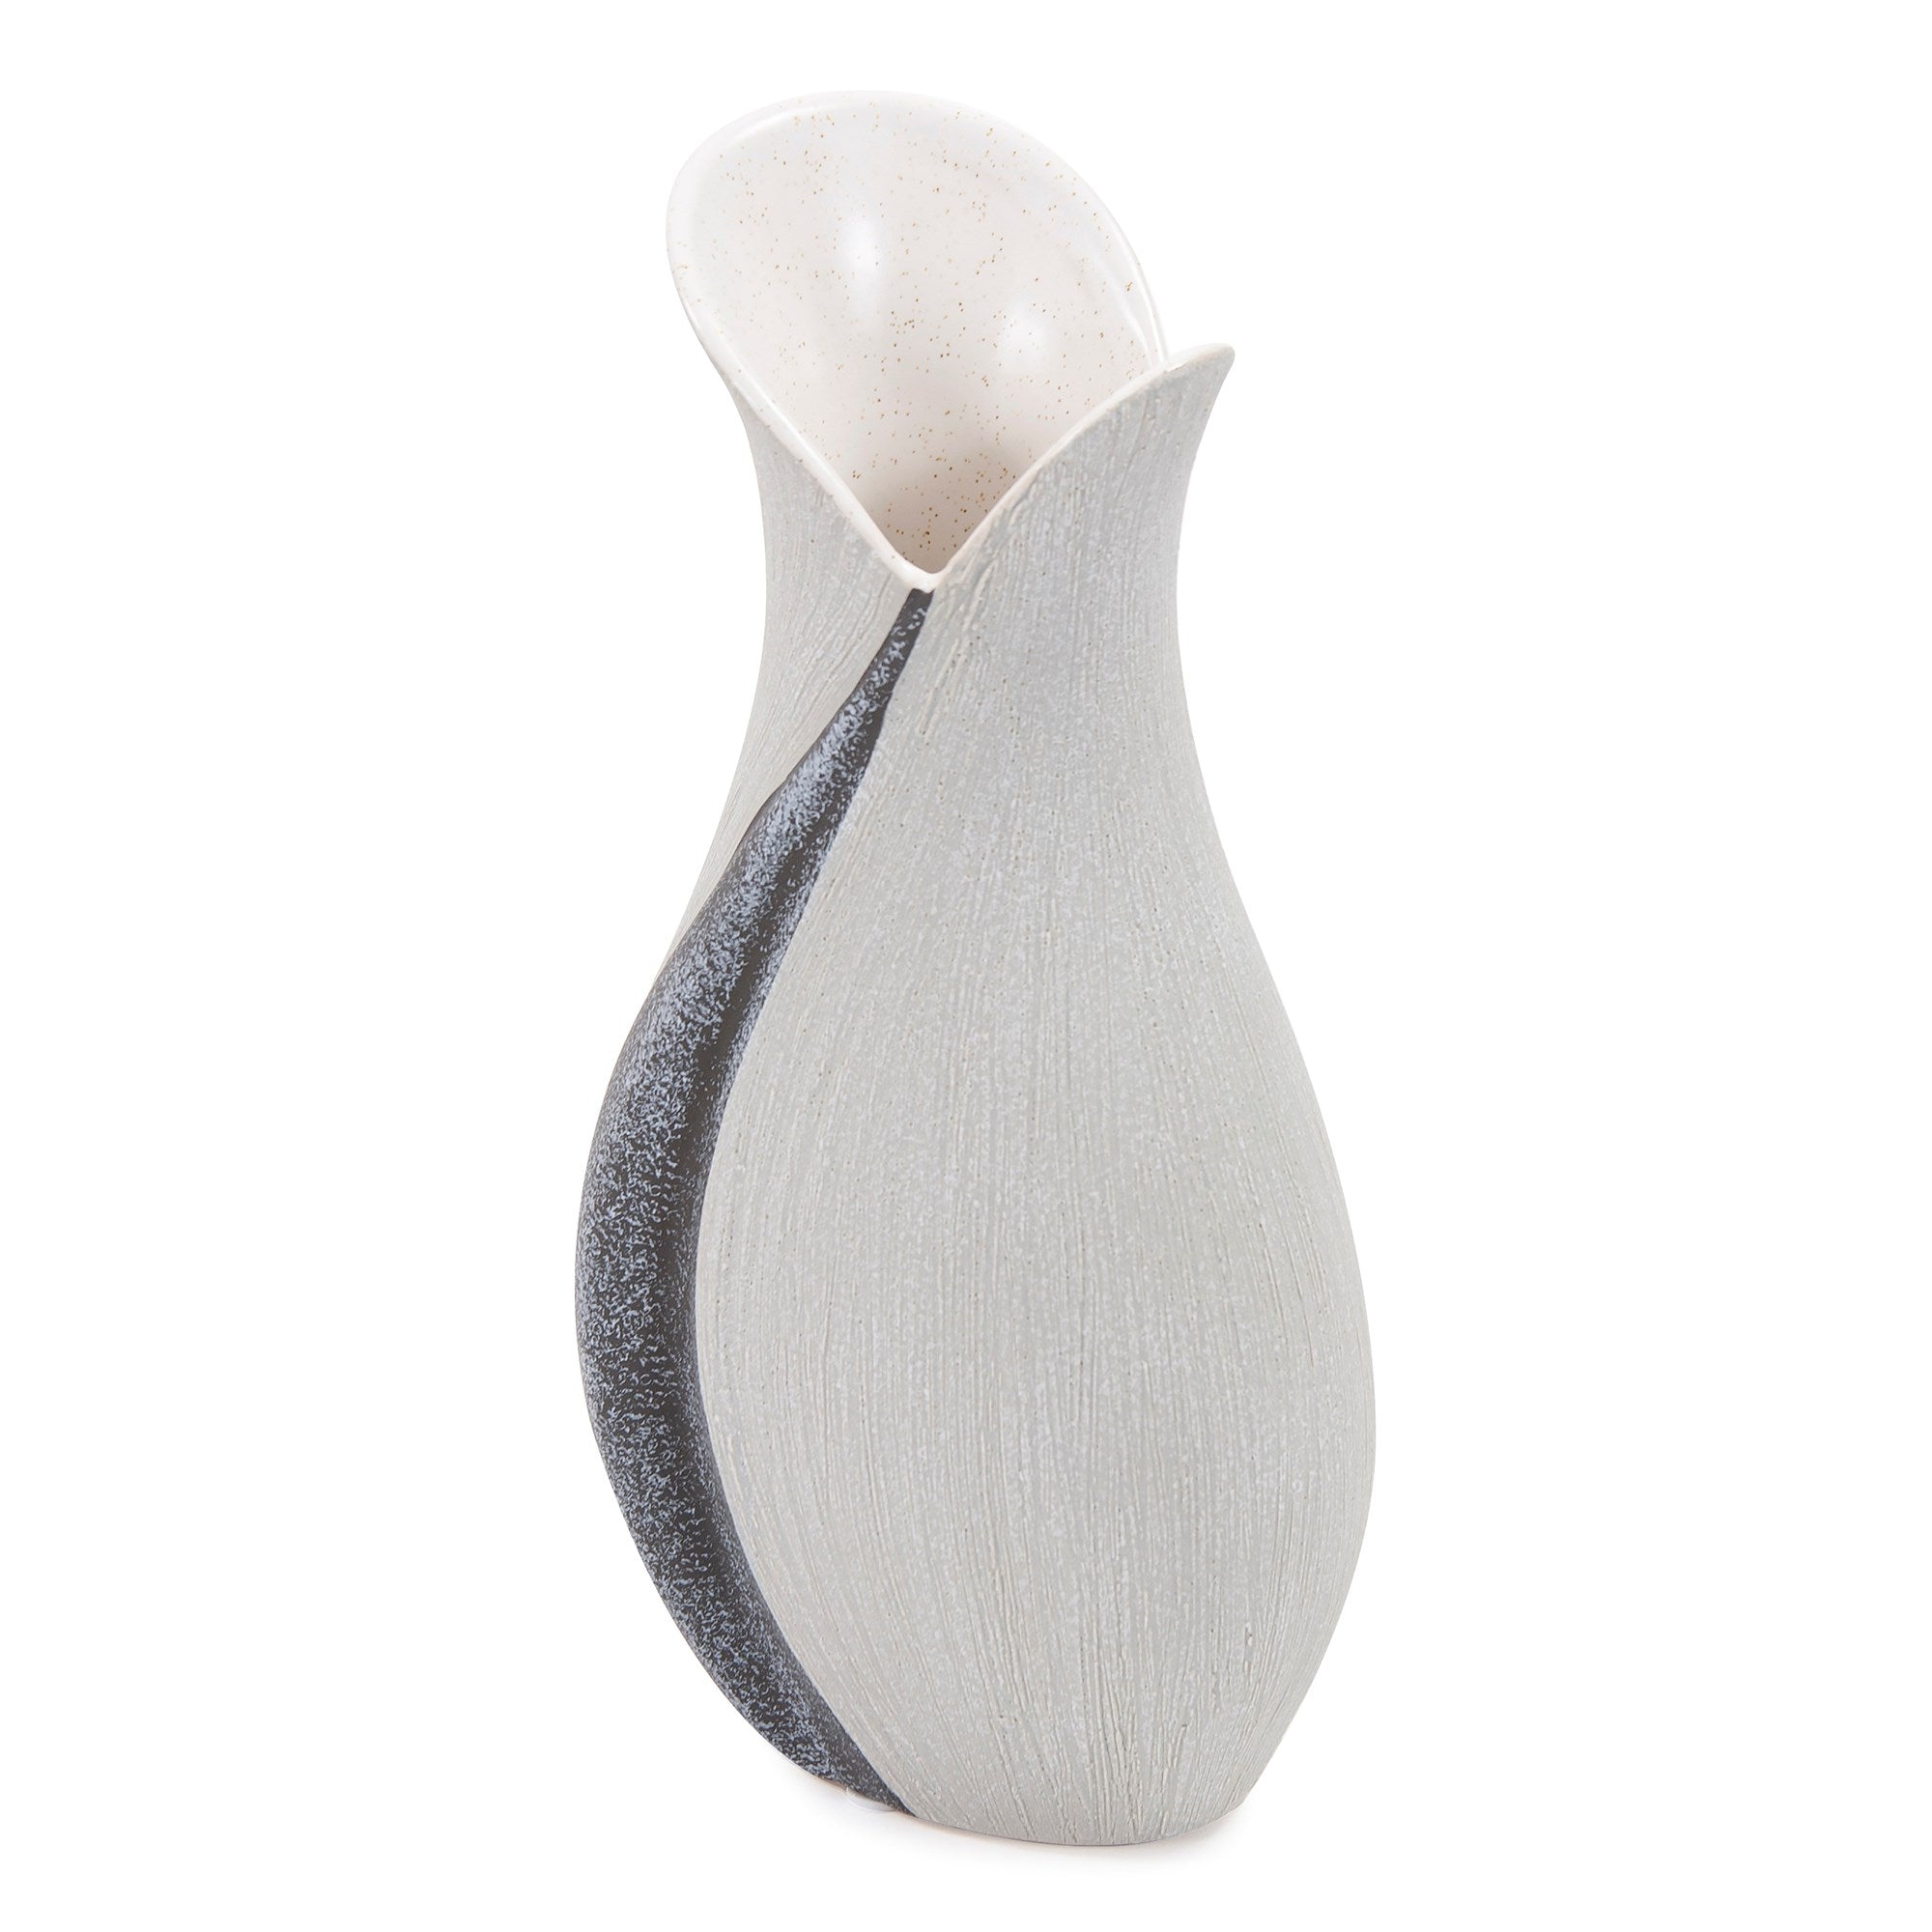 Dimension Two Toned Vase, Tall